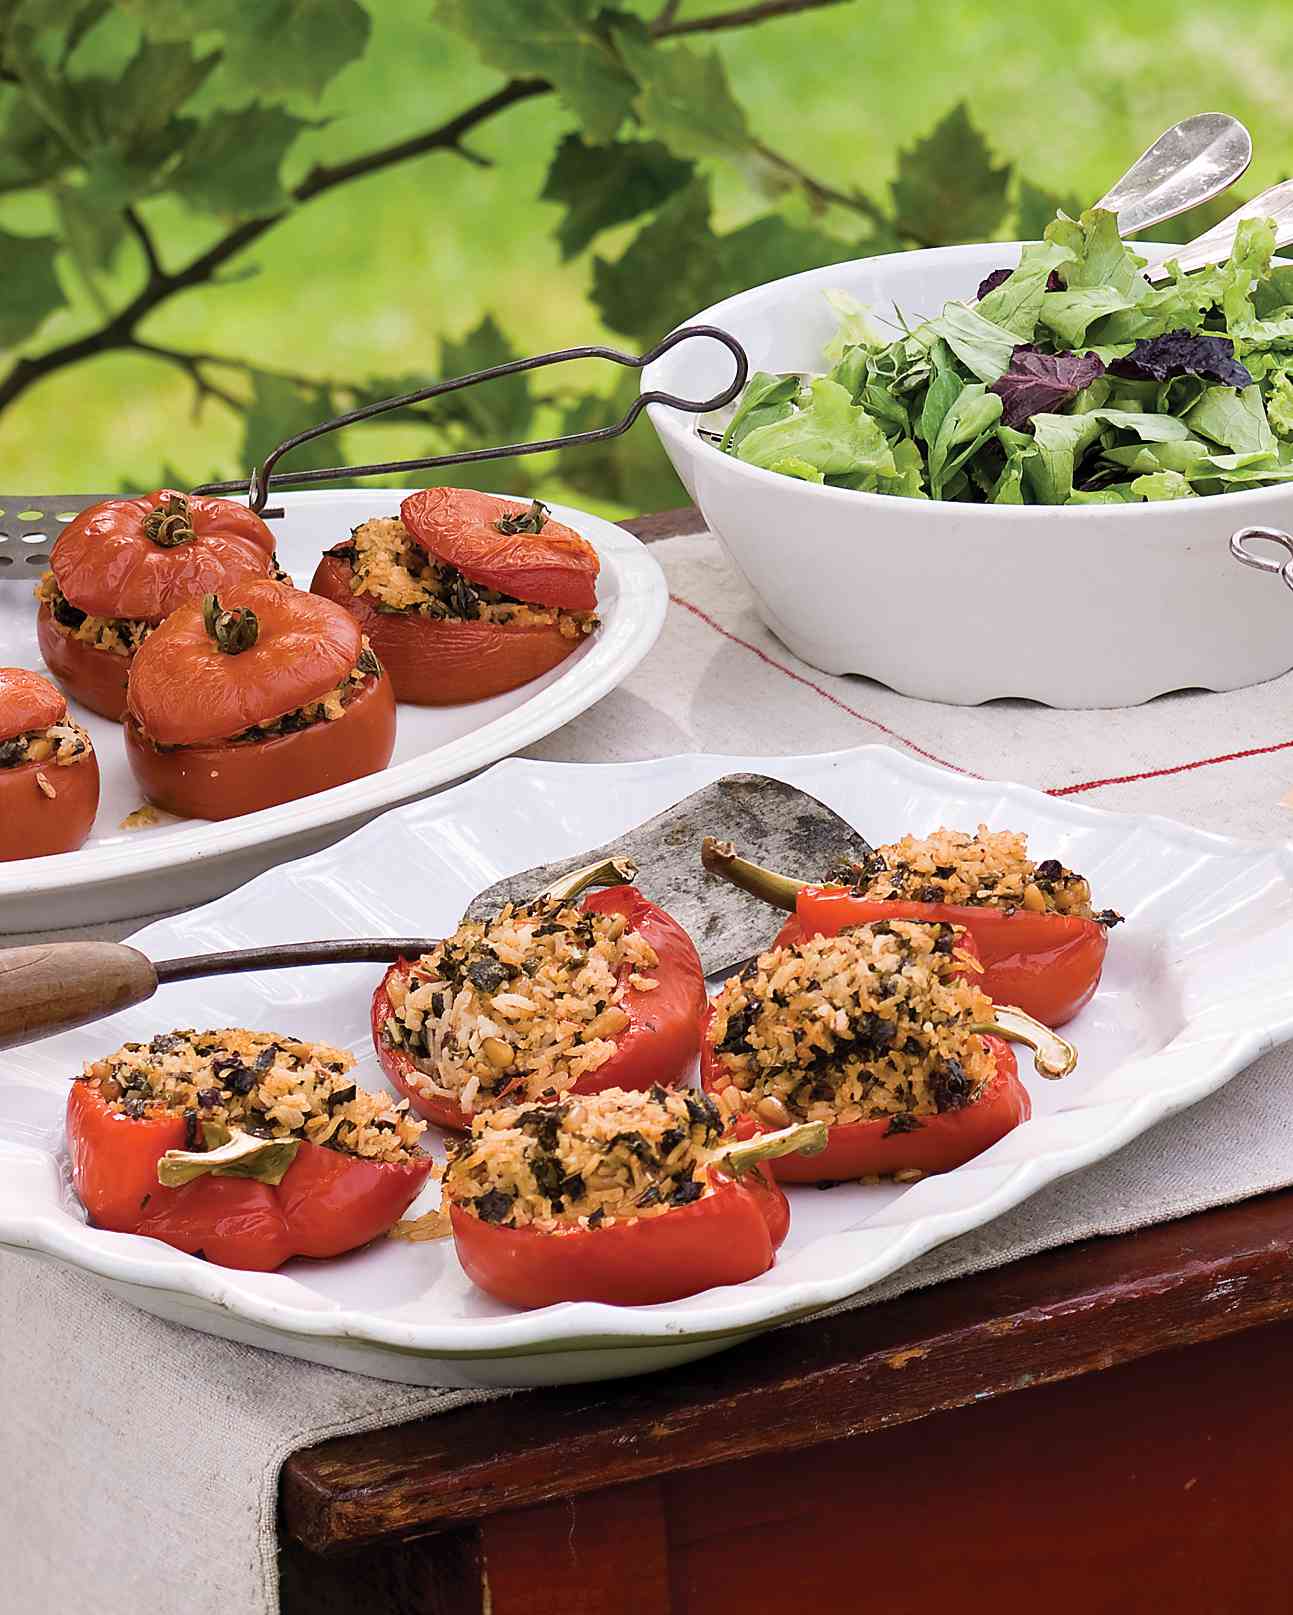 Tomatoes and Peppers Stuffed with Basmati Rice and Kale